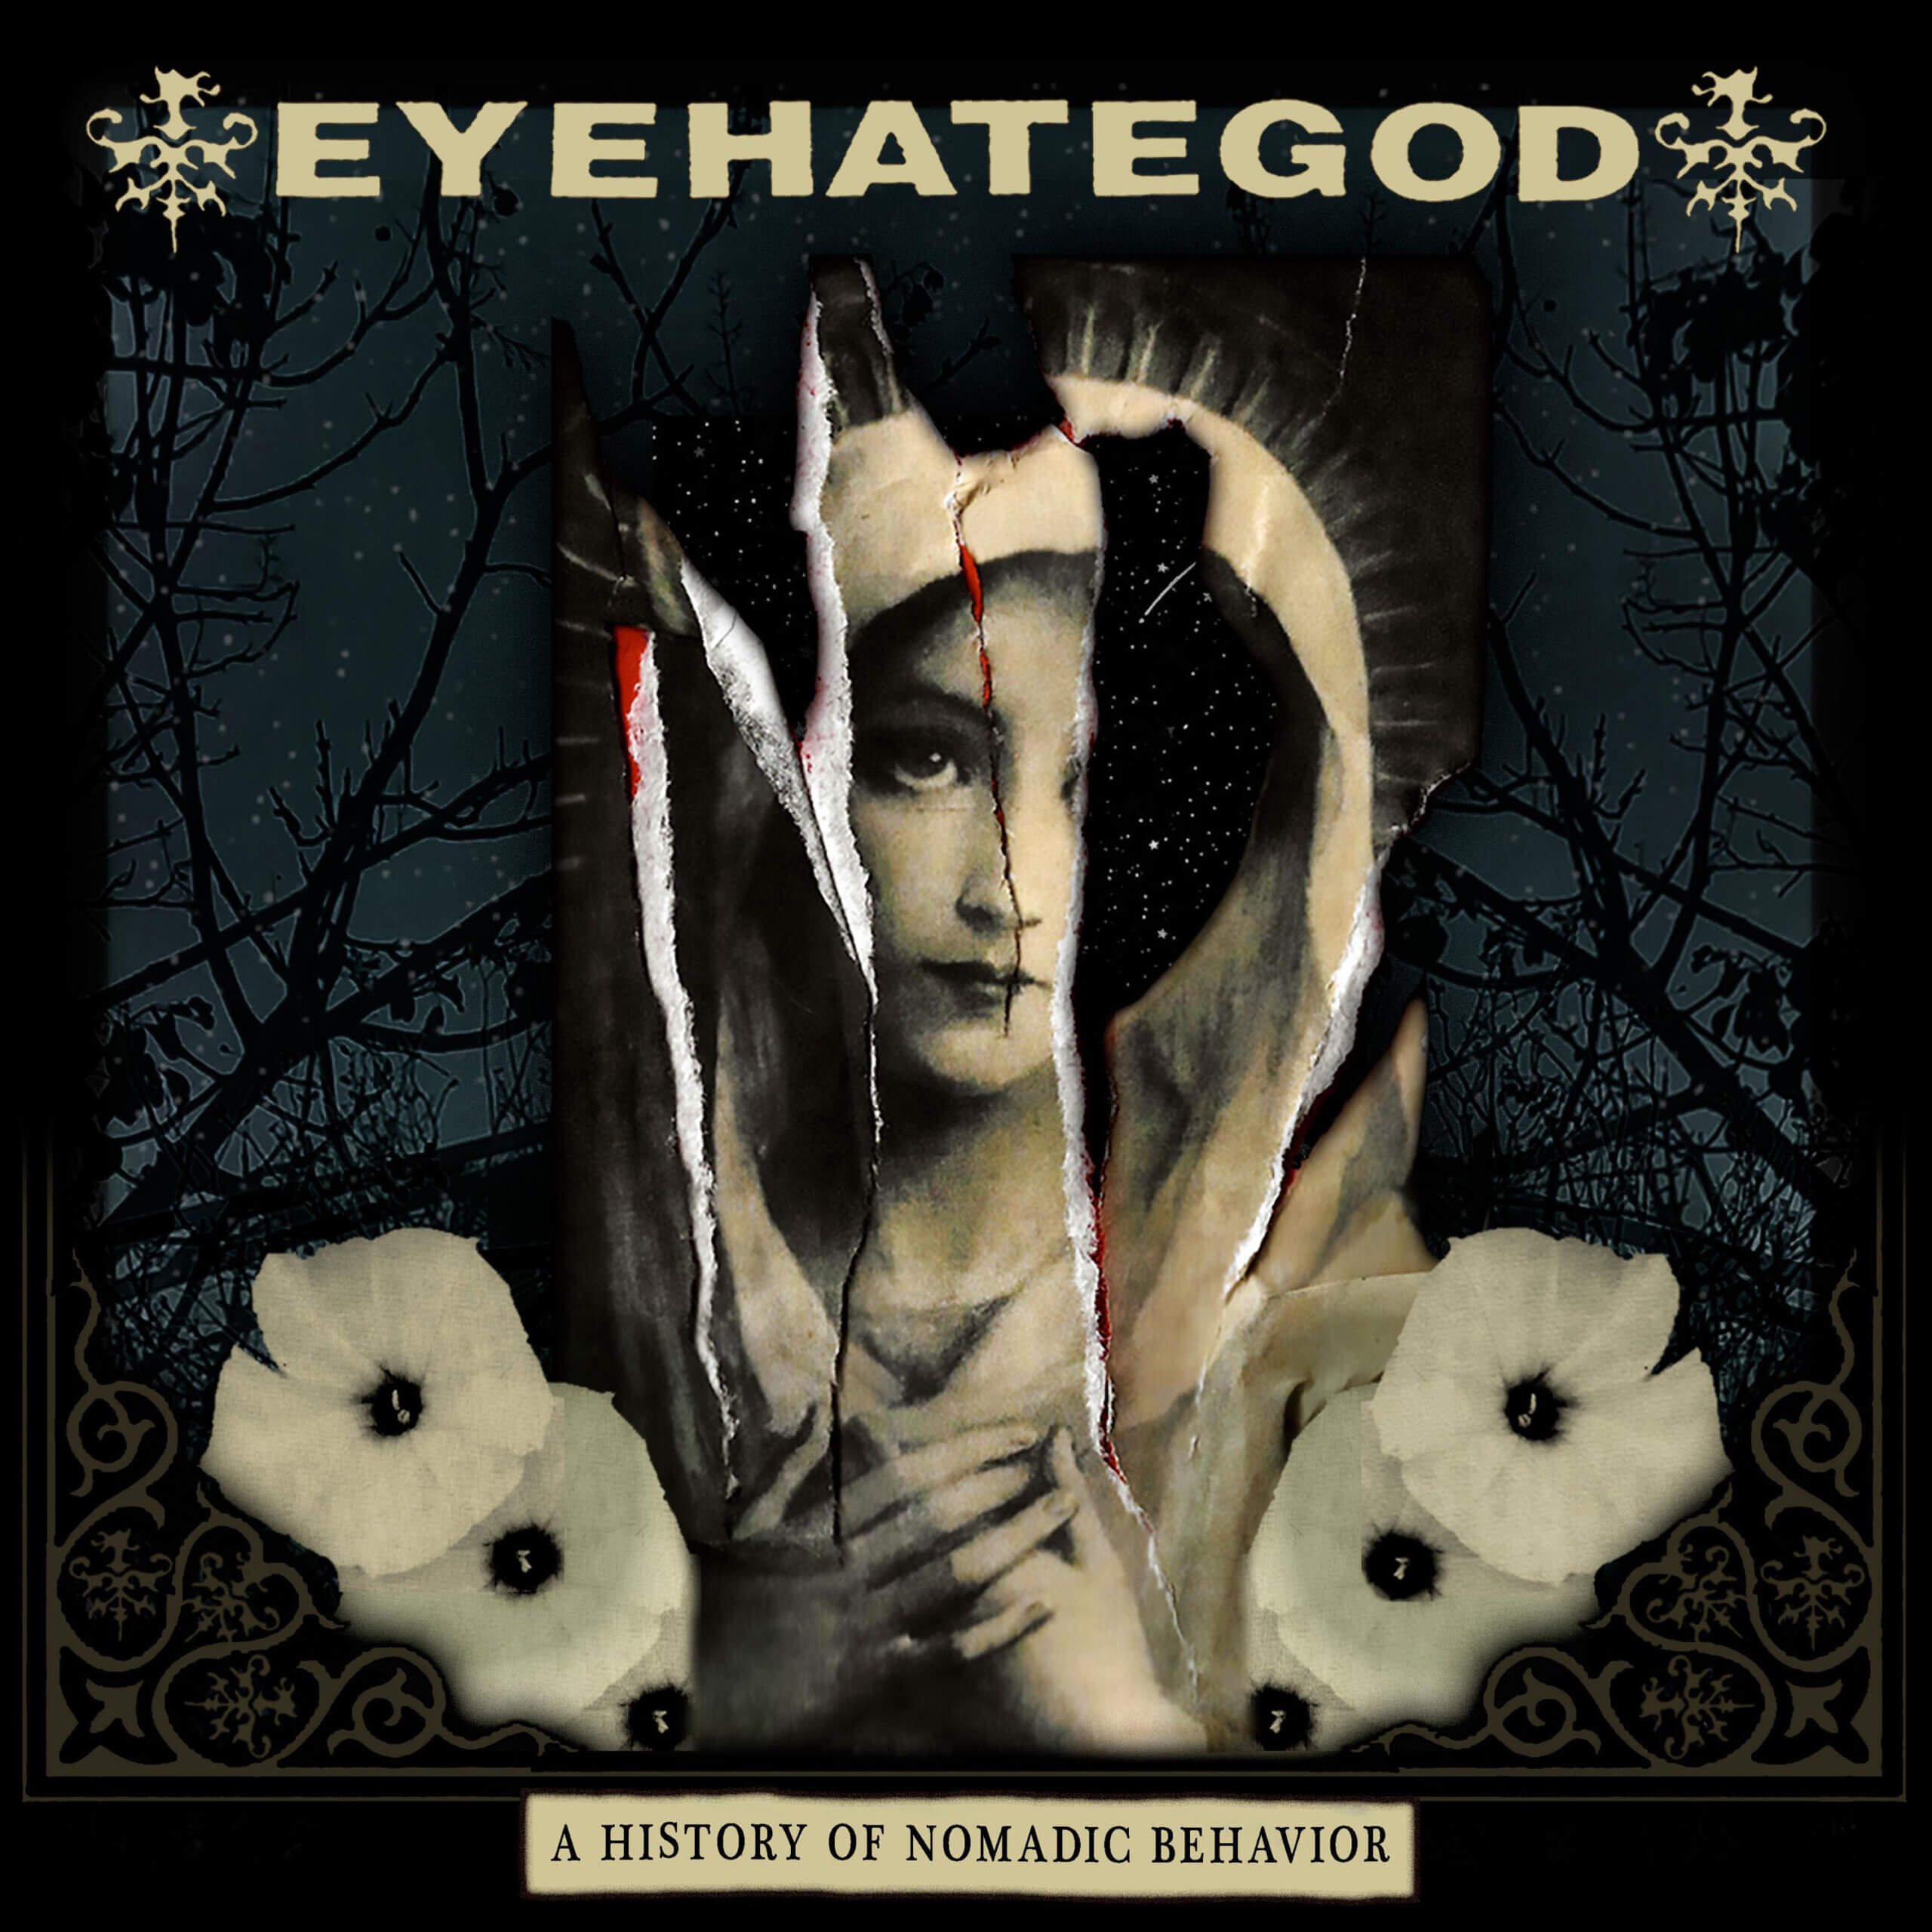 Eyehategod A History of Nomadic Behavior album Review by Jahmeel Russell for Northern Transmissions